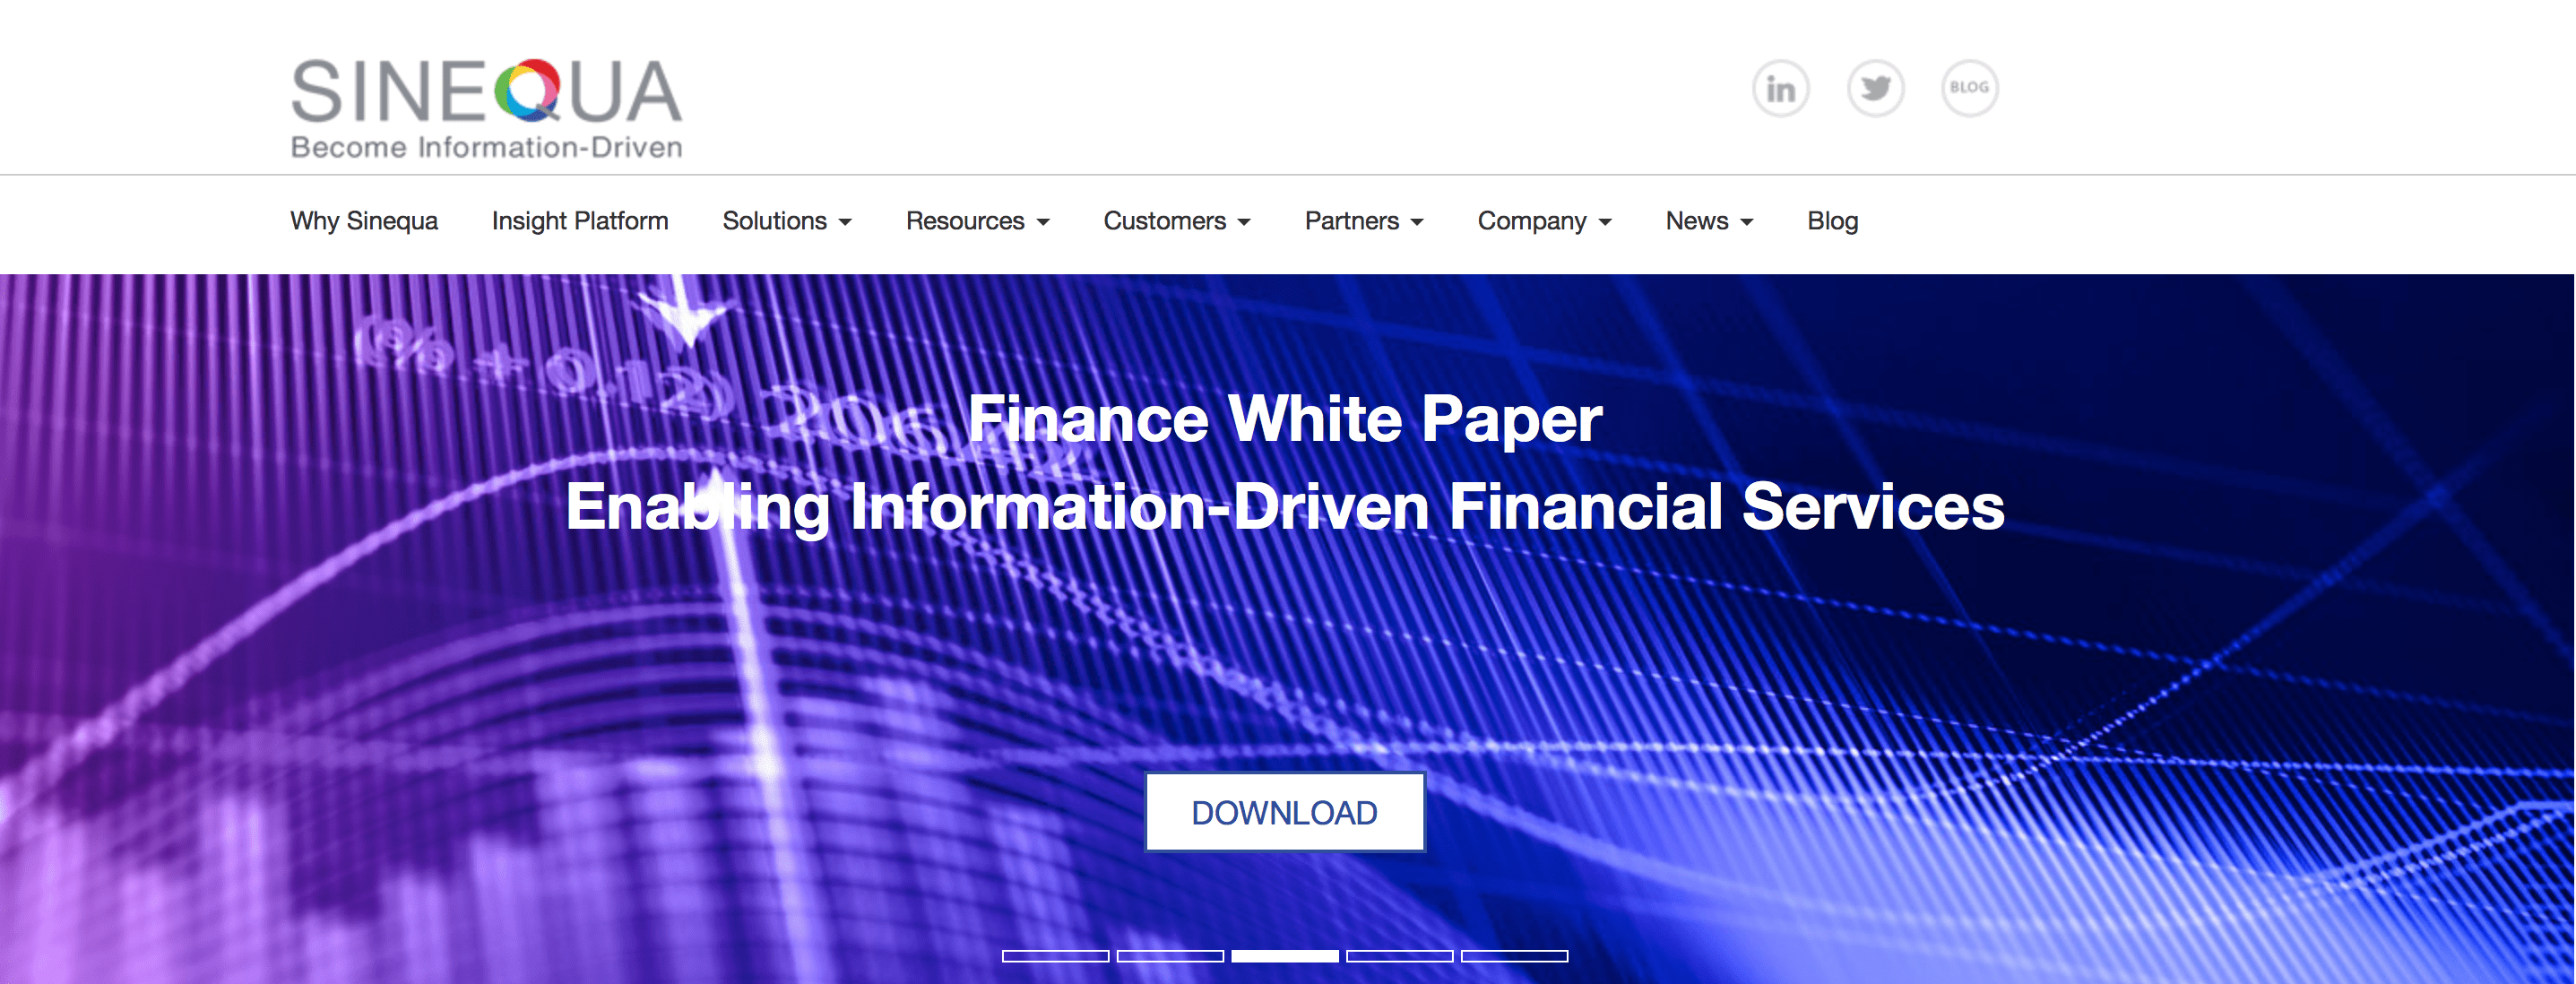 Enabling Information-Driven Financial Services